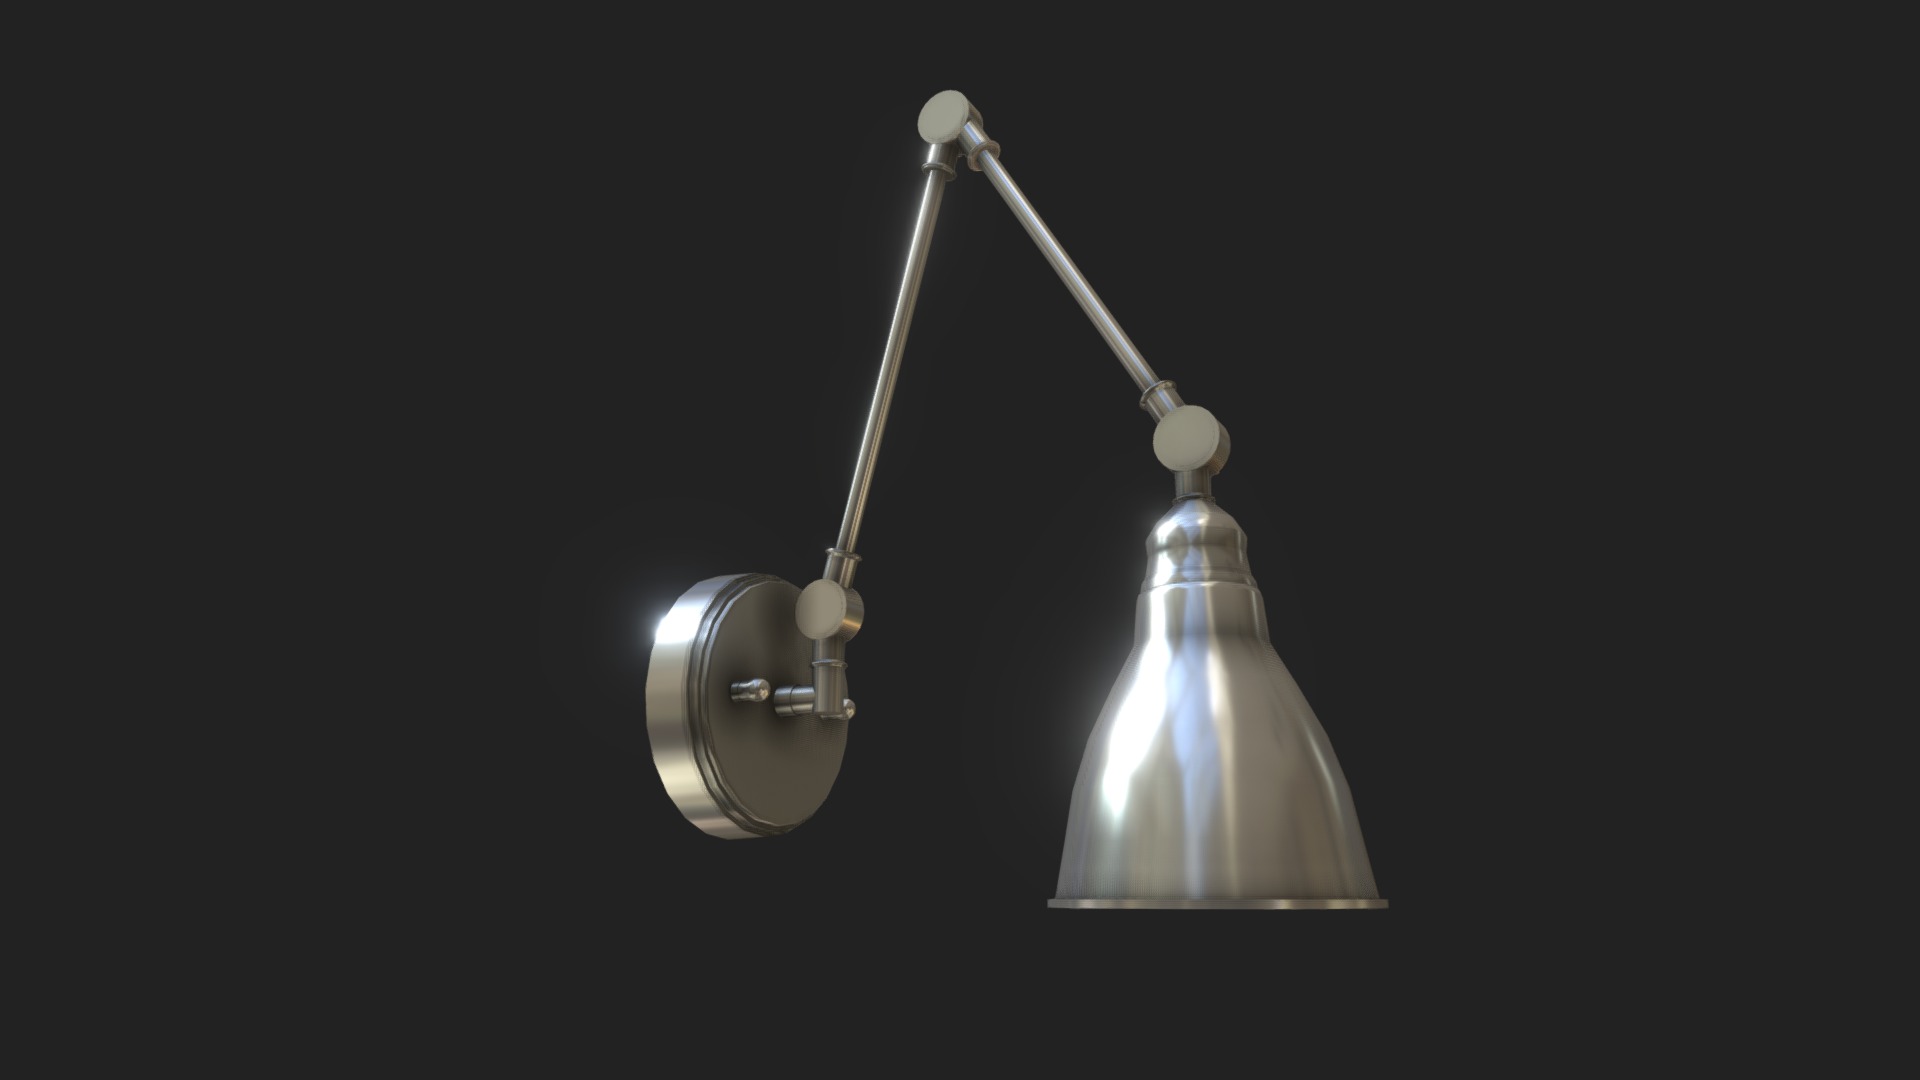 3D model HGPWL-61 - This is a 3D model of the HGPWL-61. The 3D model is about a light bulb with a light bulb.